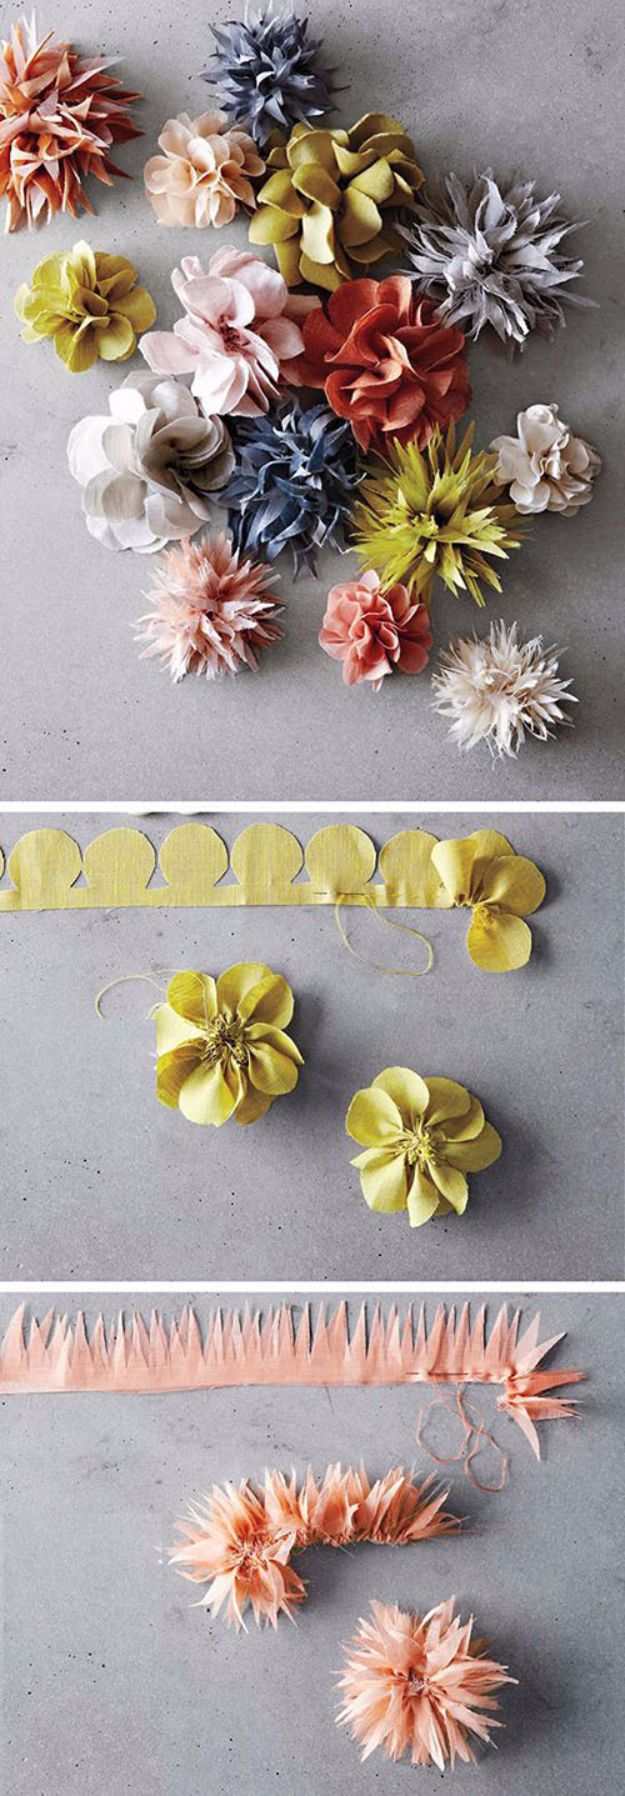 DIY Paper Flowers For Your Room - DIY Beautiful Paper Flower - How To Make A Paper Flower - Large Wedding Backdrop for Wall Decor - Easy Tissue Paper Flower Tutorial for Kids - Giant Projects for Photo Backdrops - Daisy, Roses, Bouquets, Centerpieces - Cricut Template and Step by Step Tutorial #papercrafts #paperflowers #teencrafts